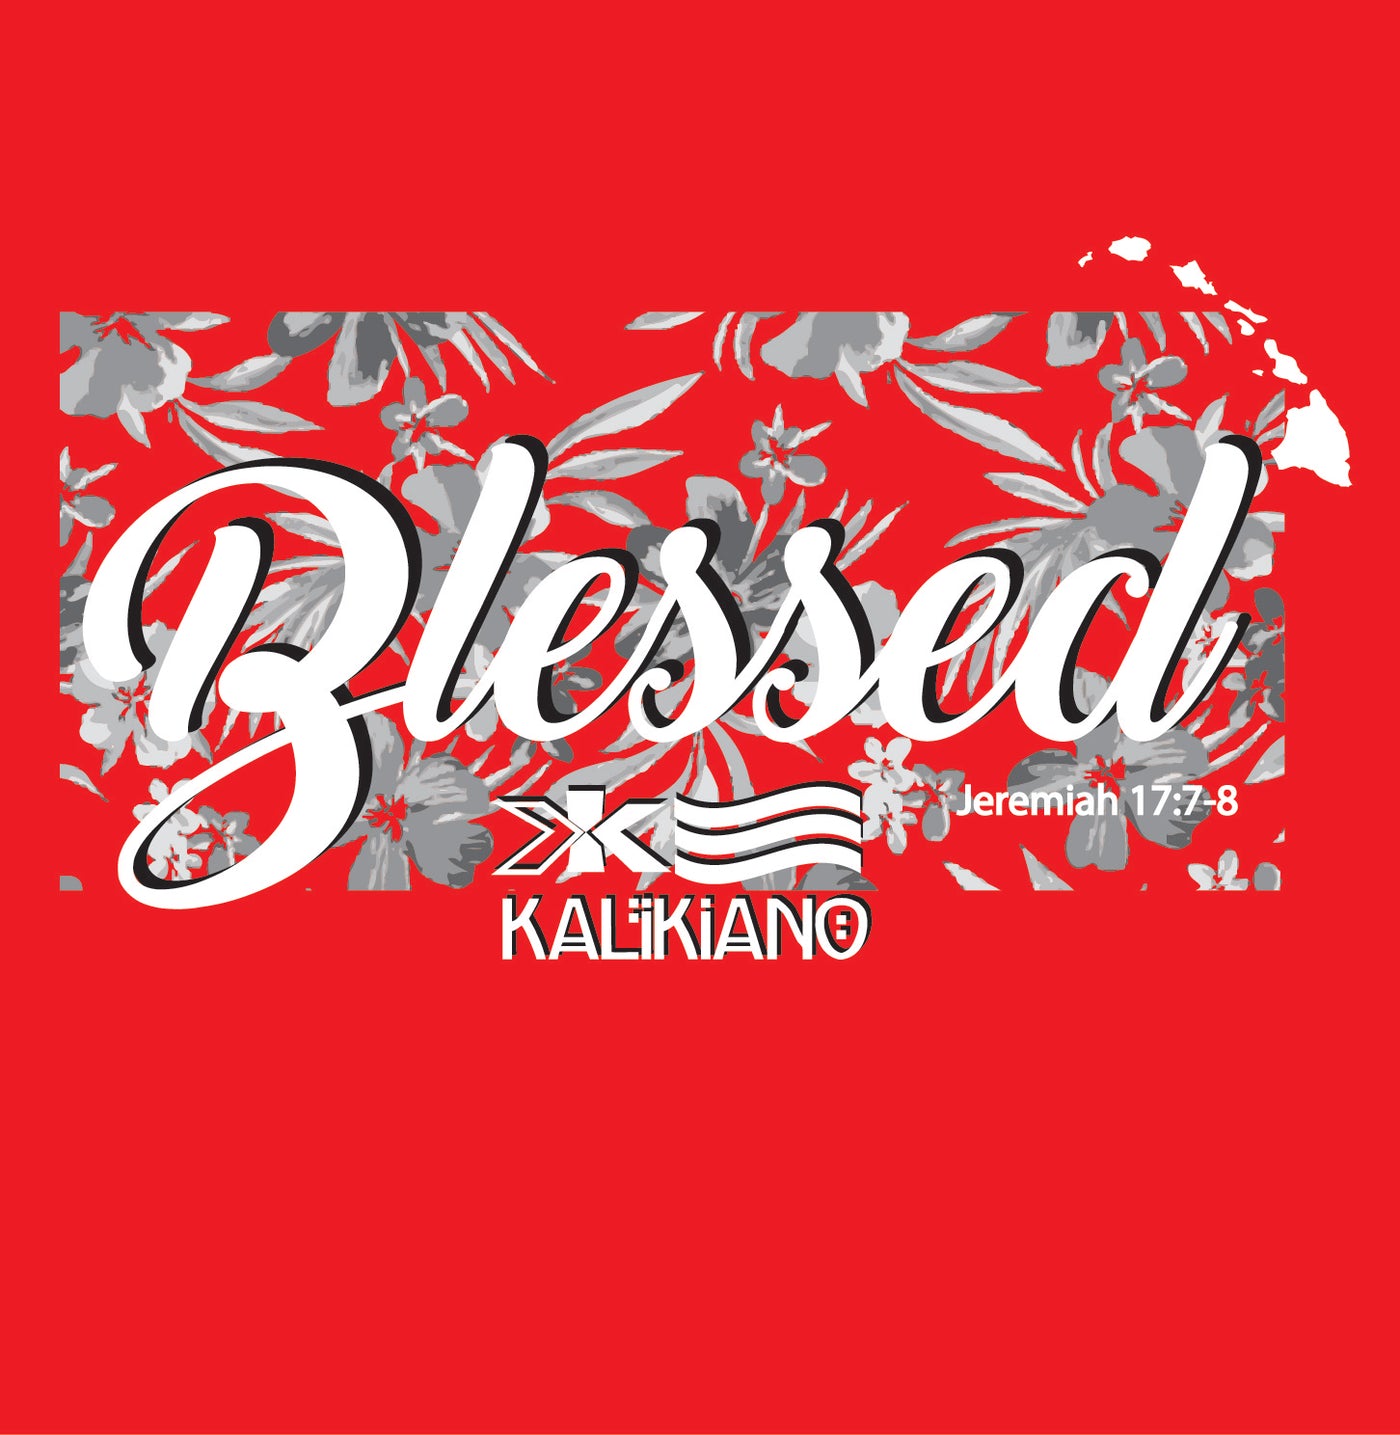 Blessed Collection Red Tee